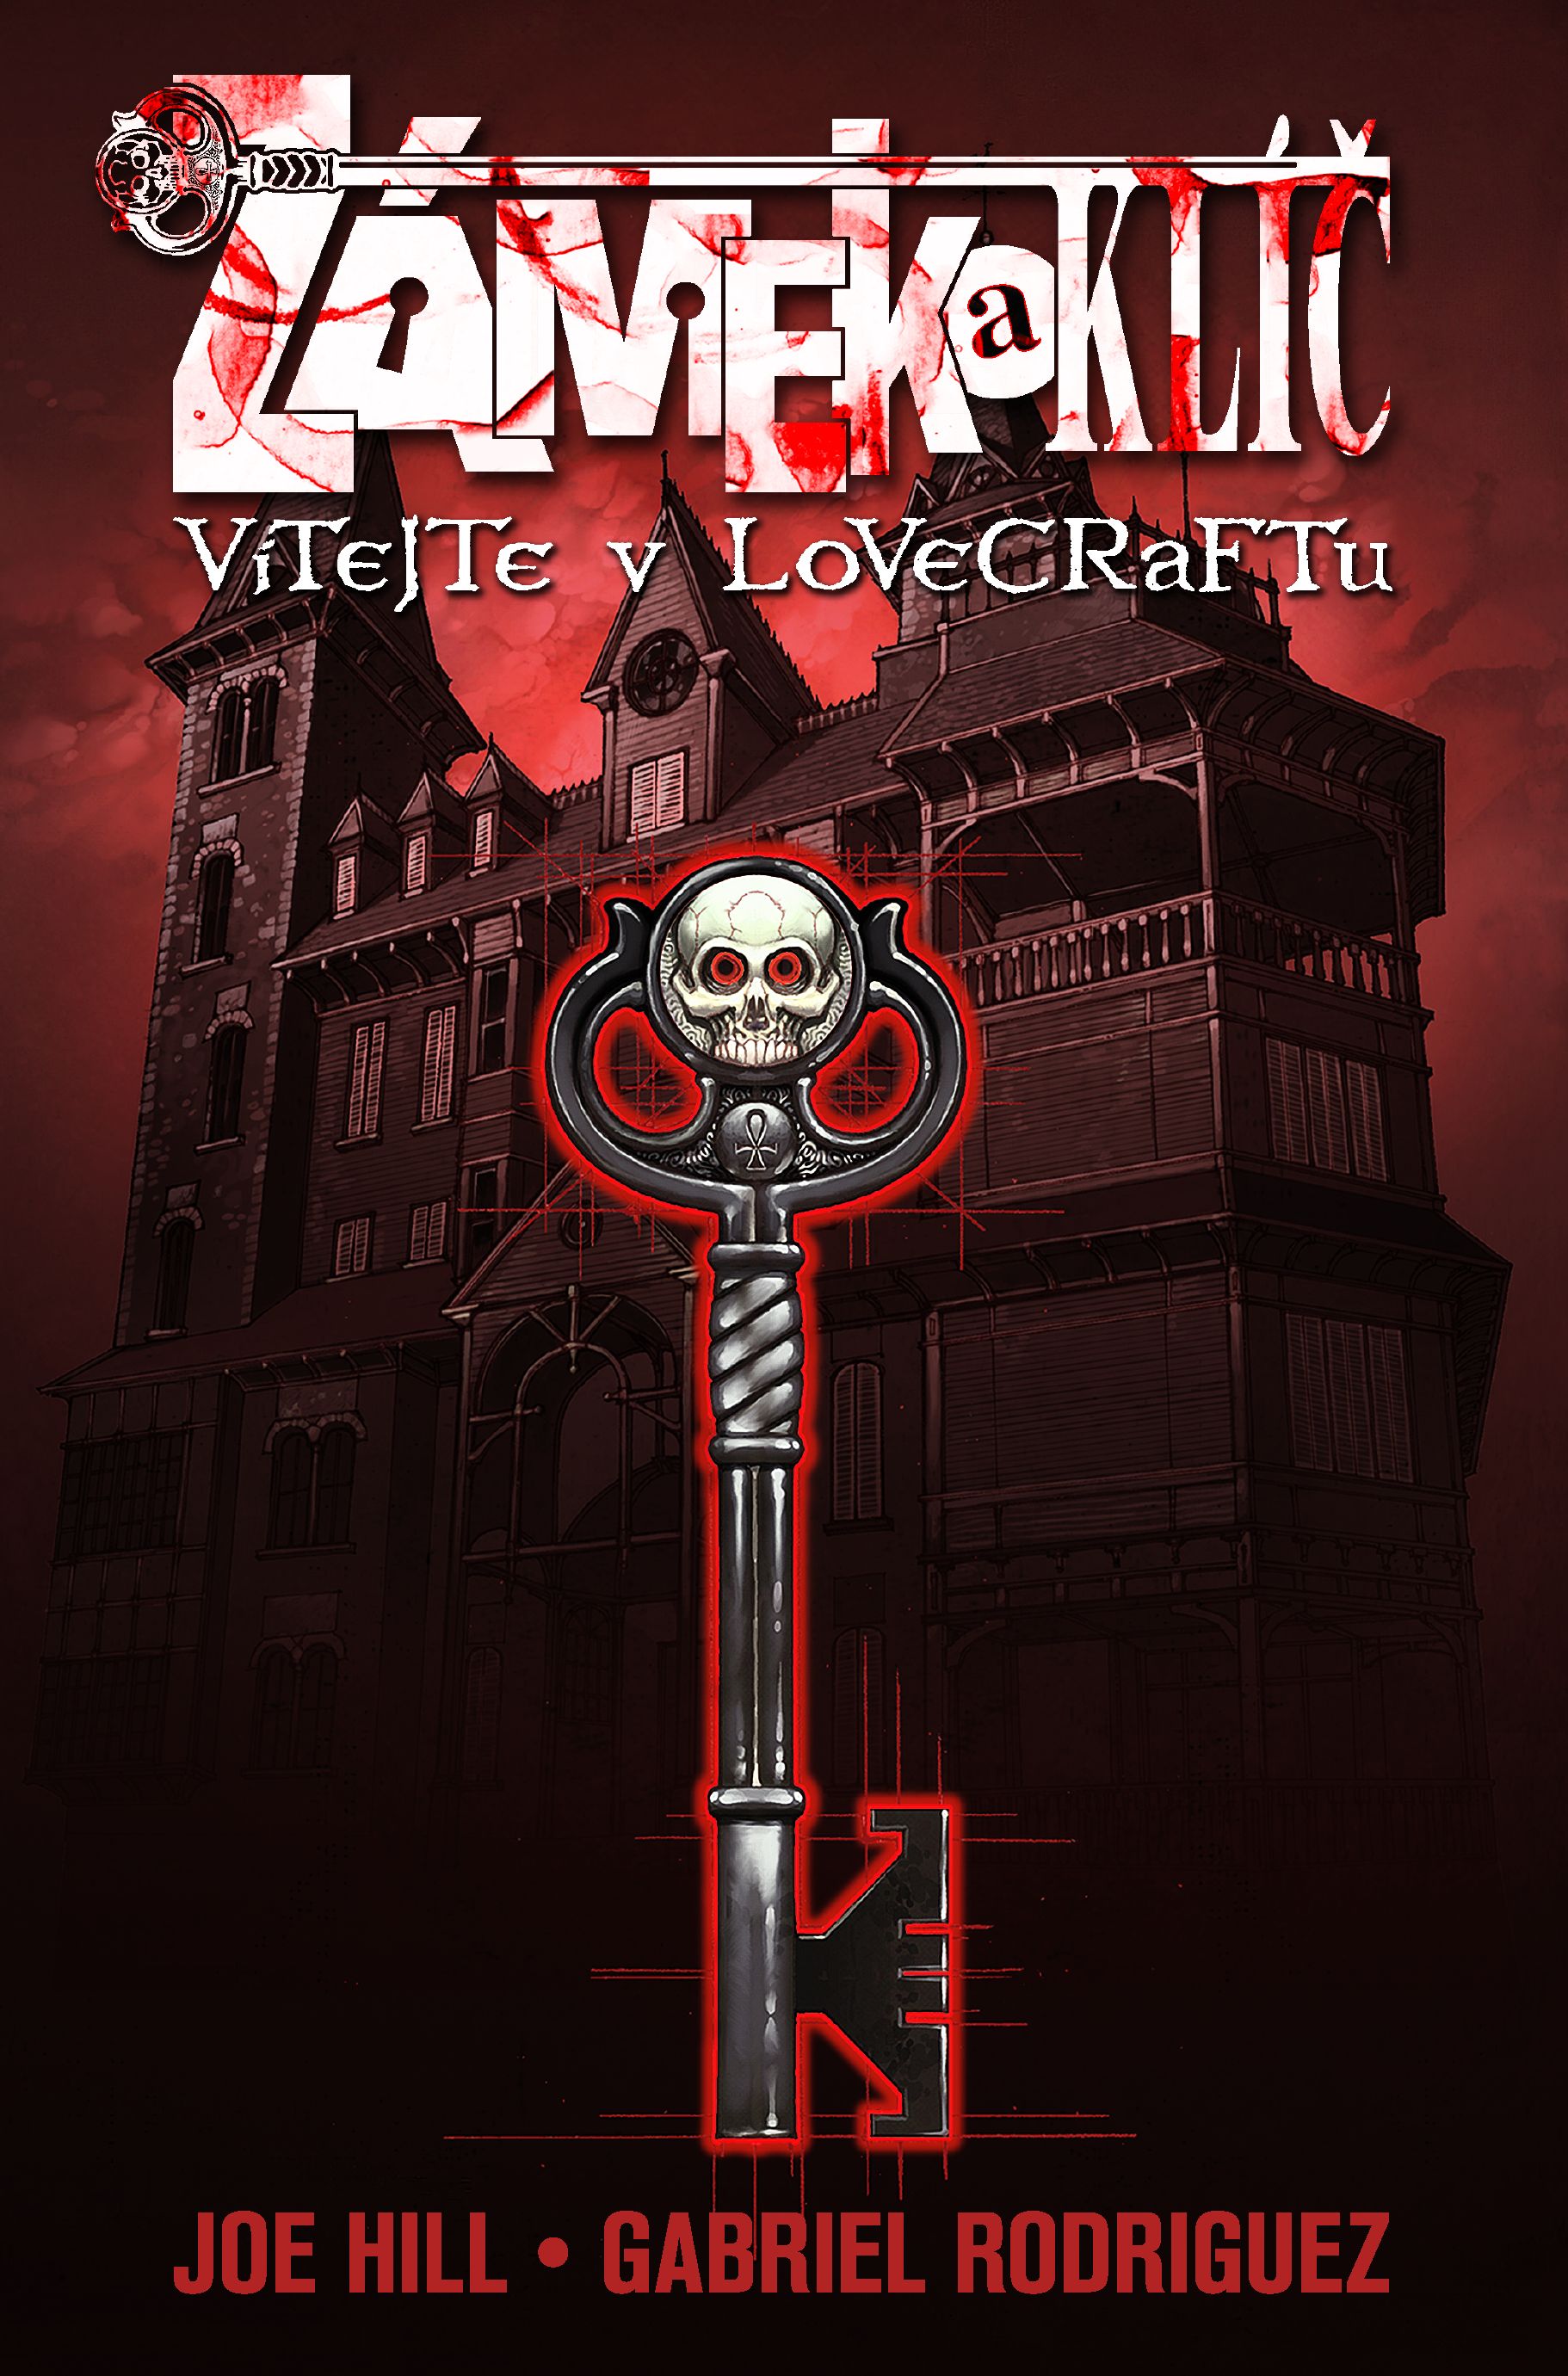 Locke And Key Vol. 1 - Welcome to Lovecraft